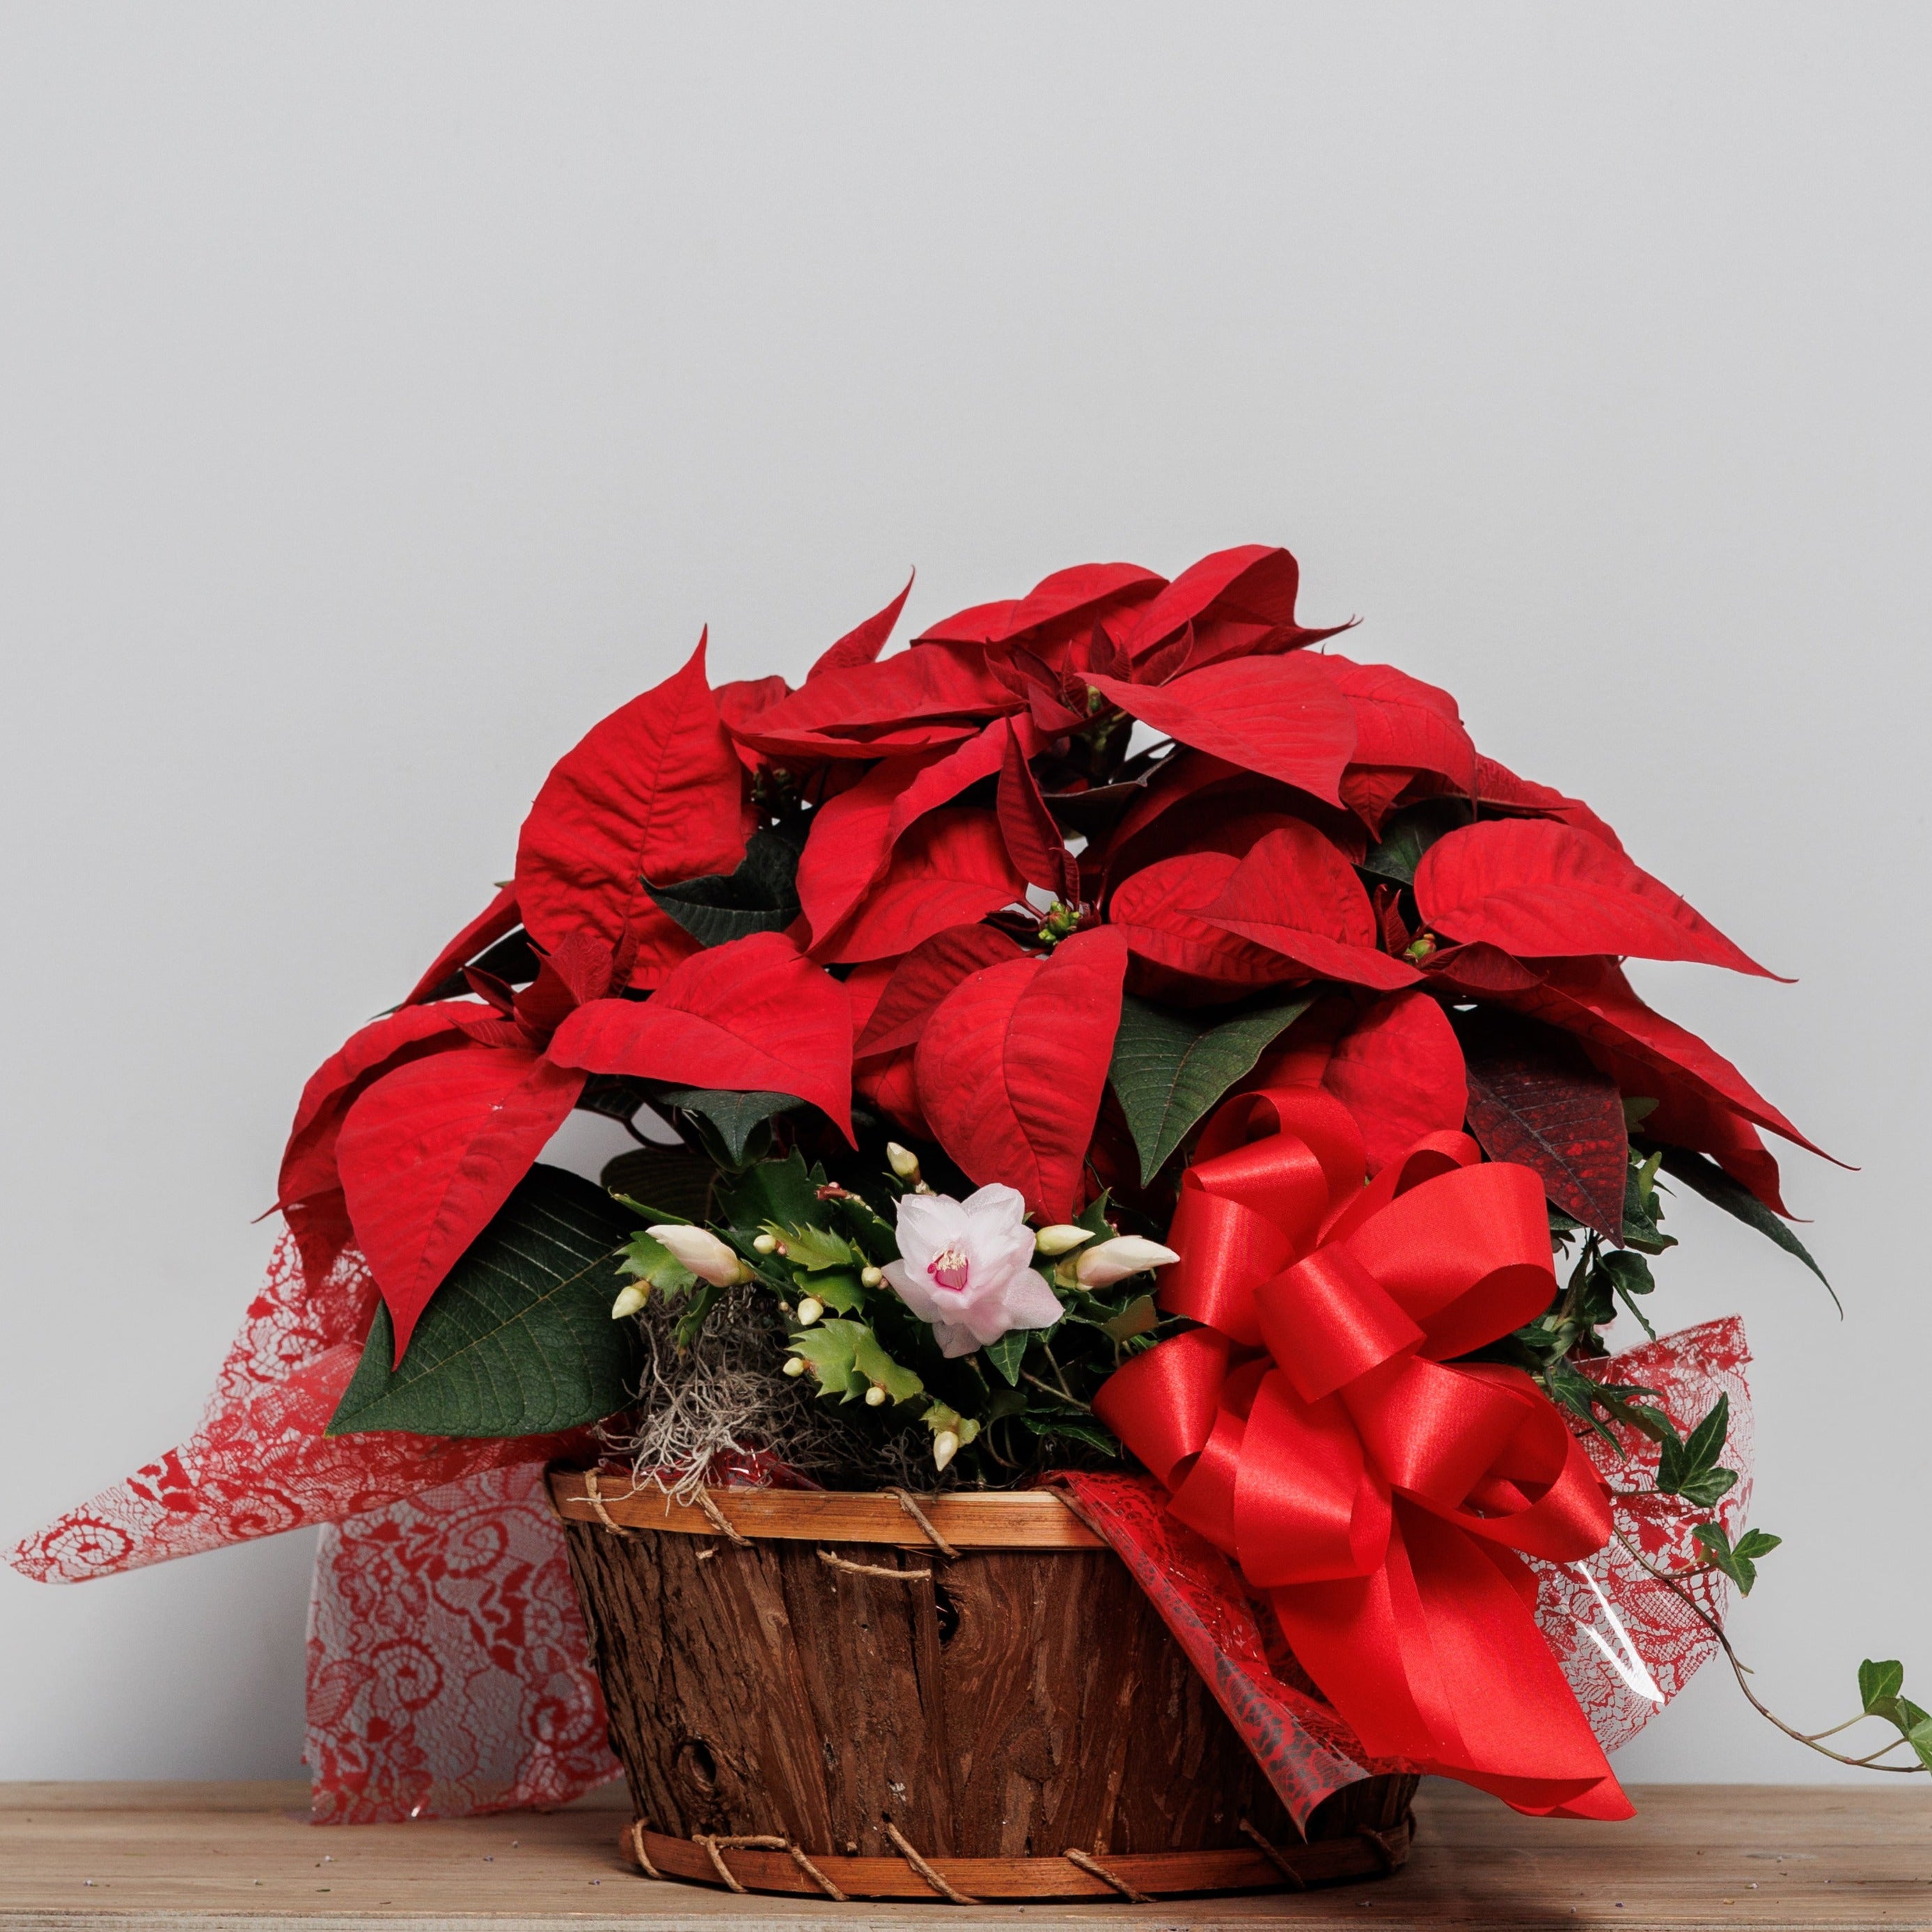 A basket with a red poinsettia, a Christmas cactus and ivy plant.